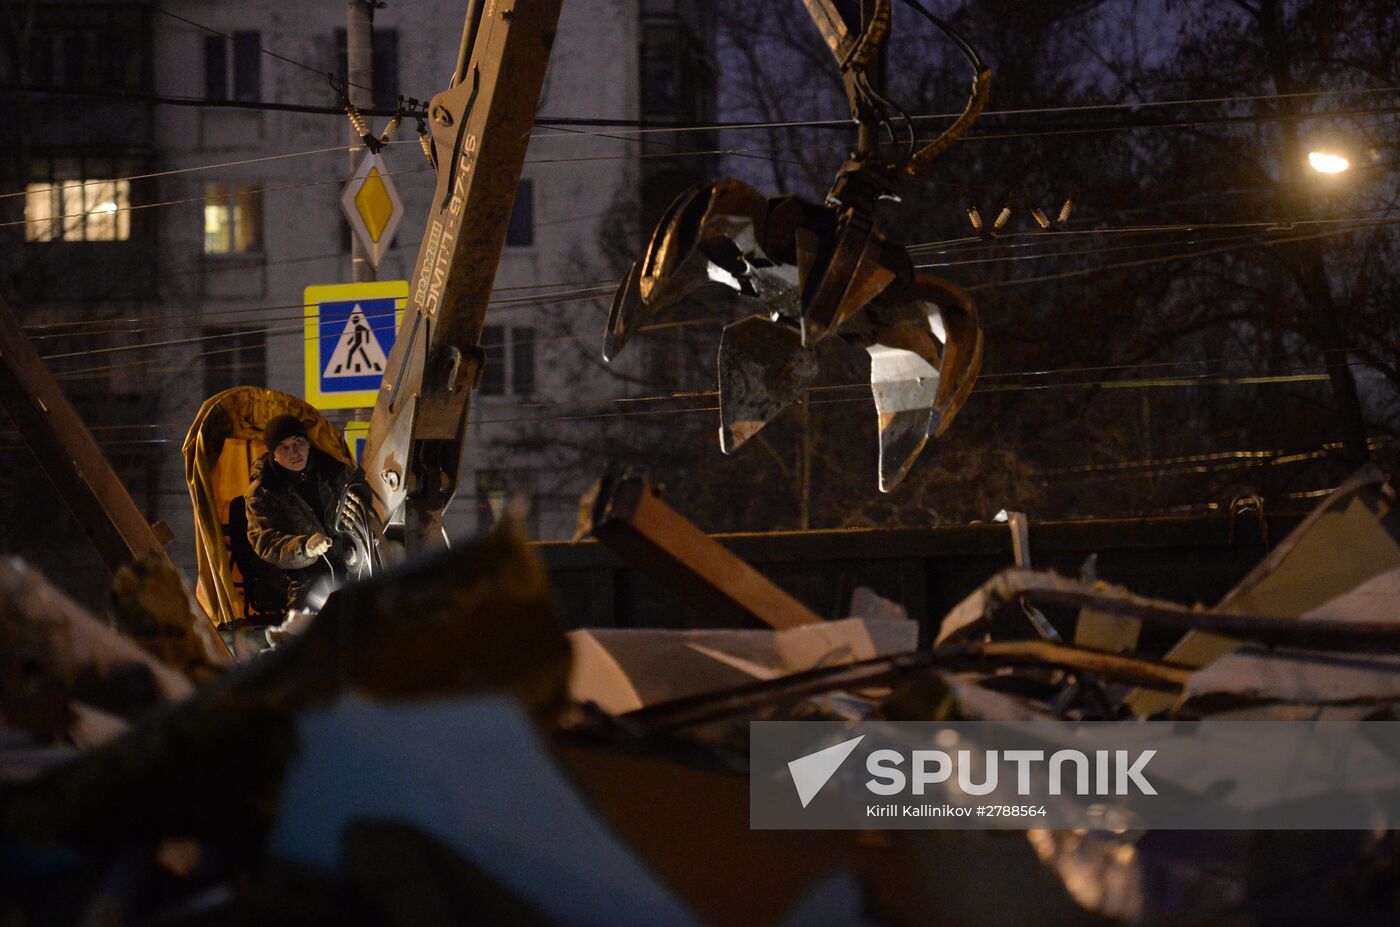 Demolition of illegal street kiosks and stalls underway in Moscow